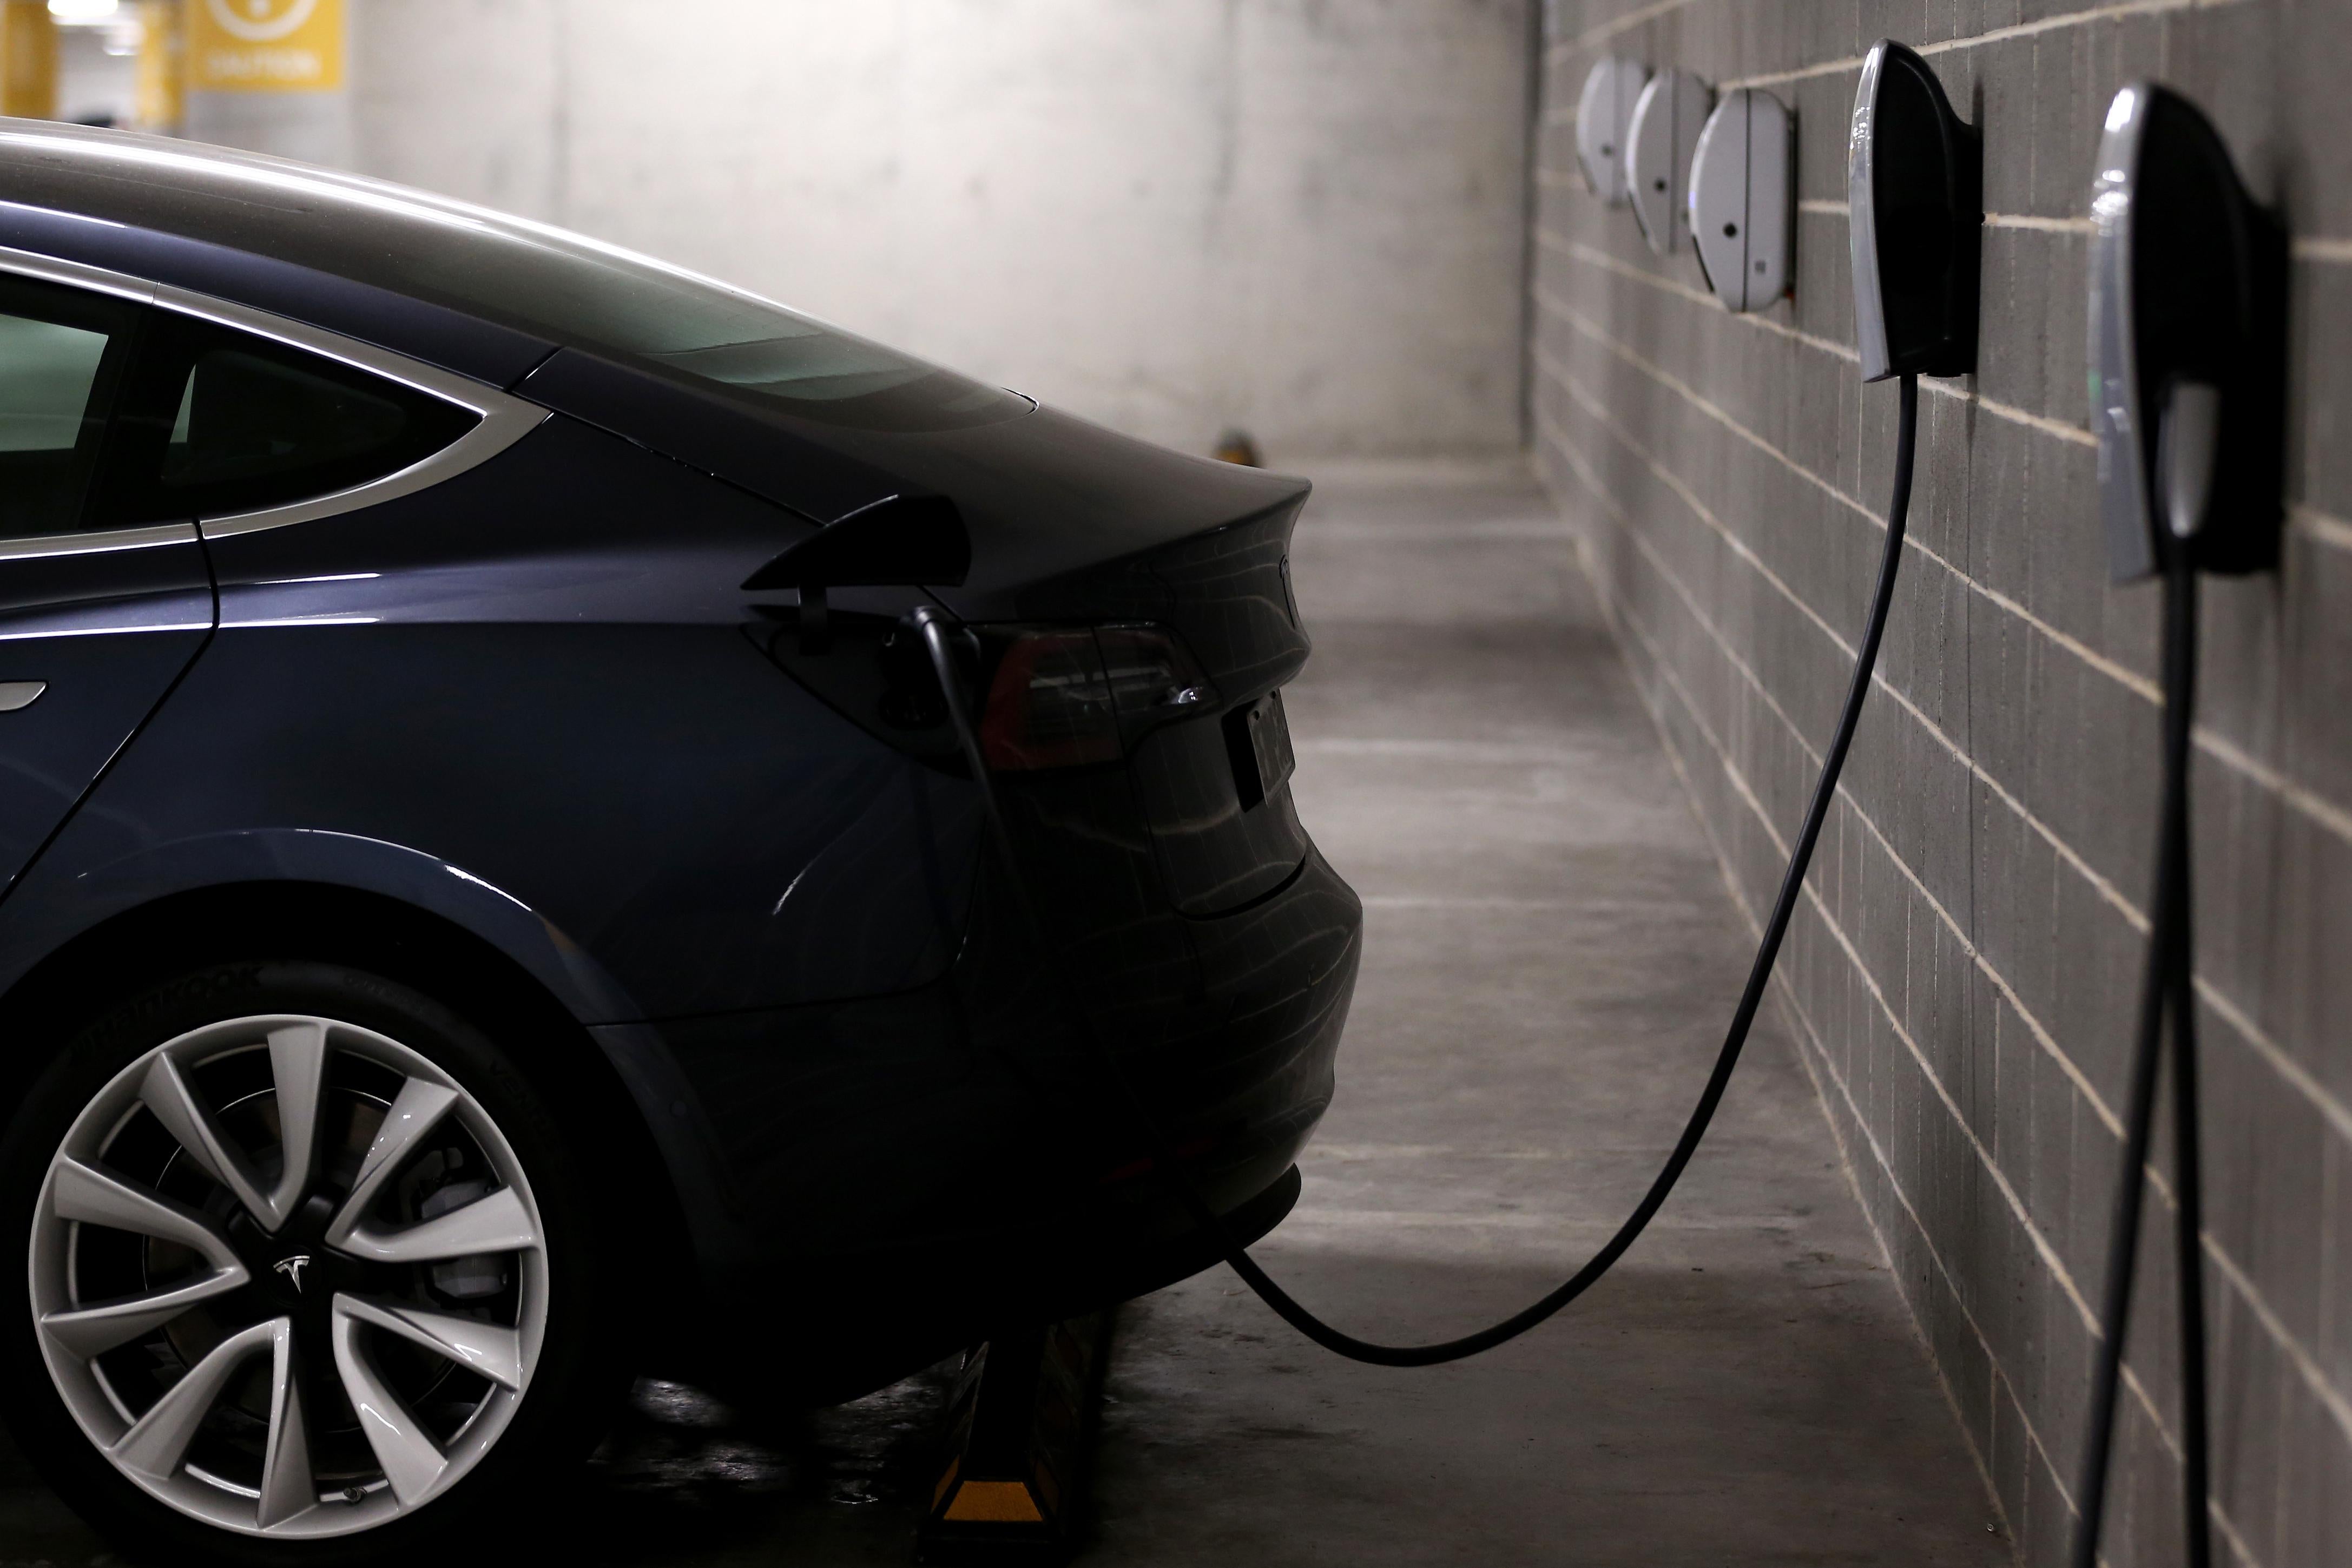 An electric car is seen plugged into an outlet on a brick wall.